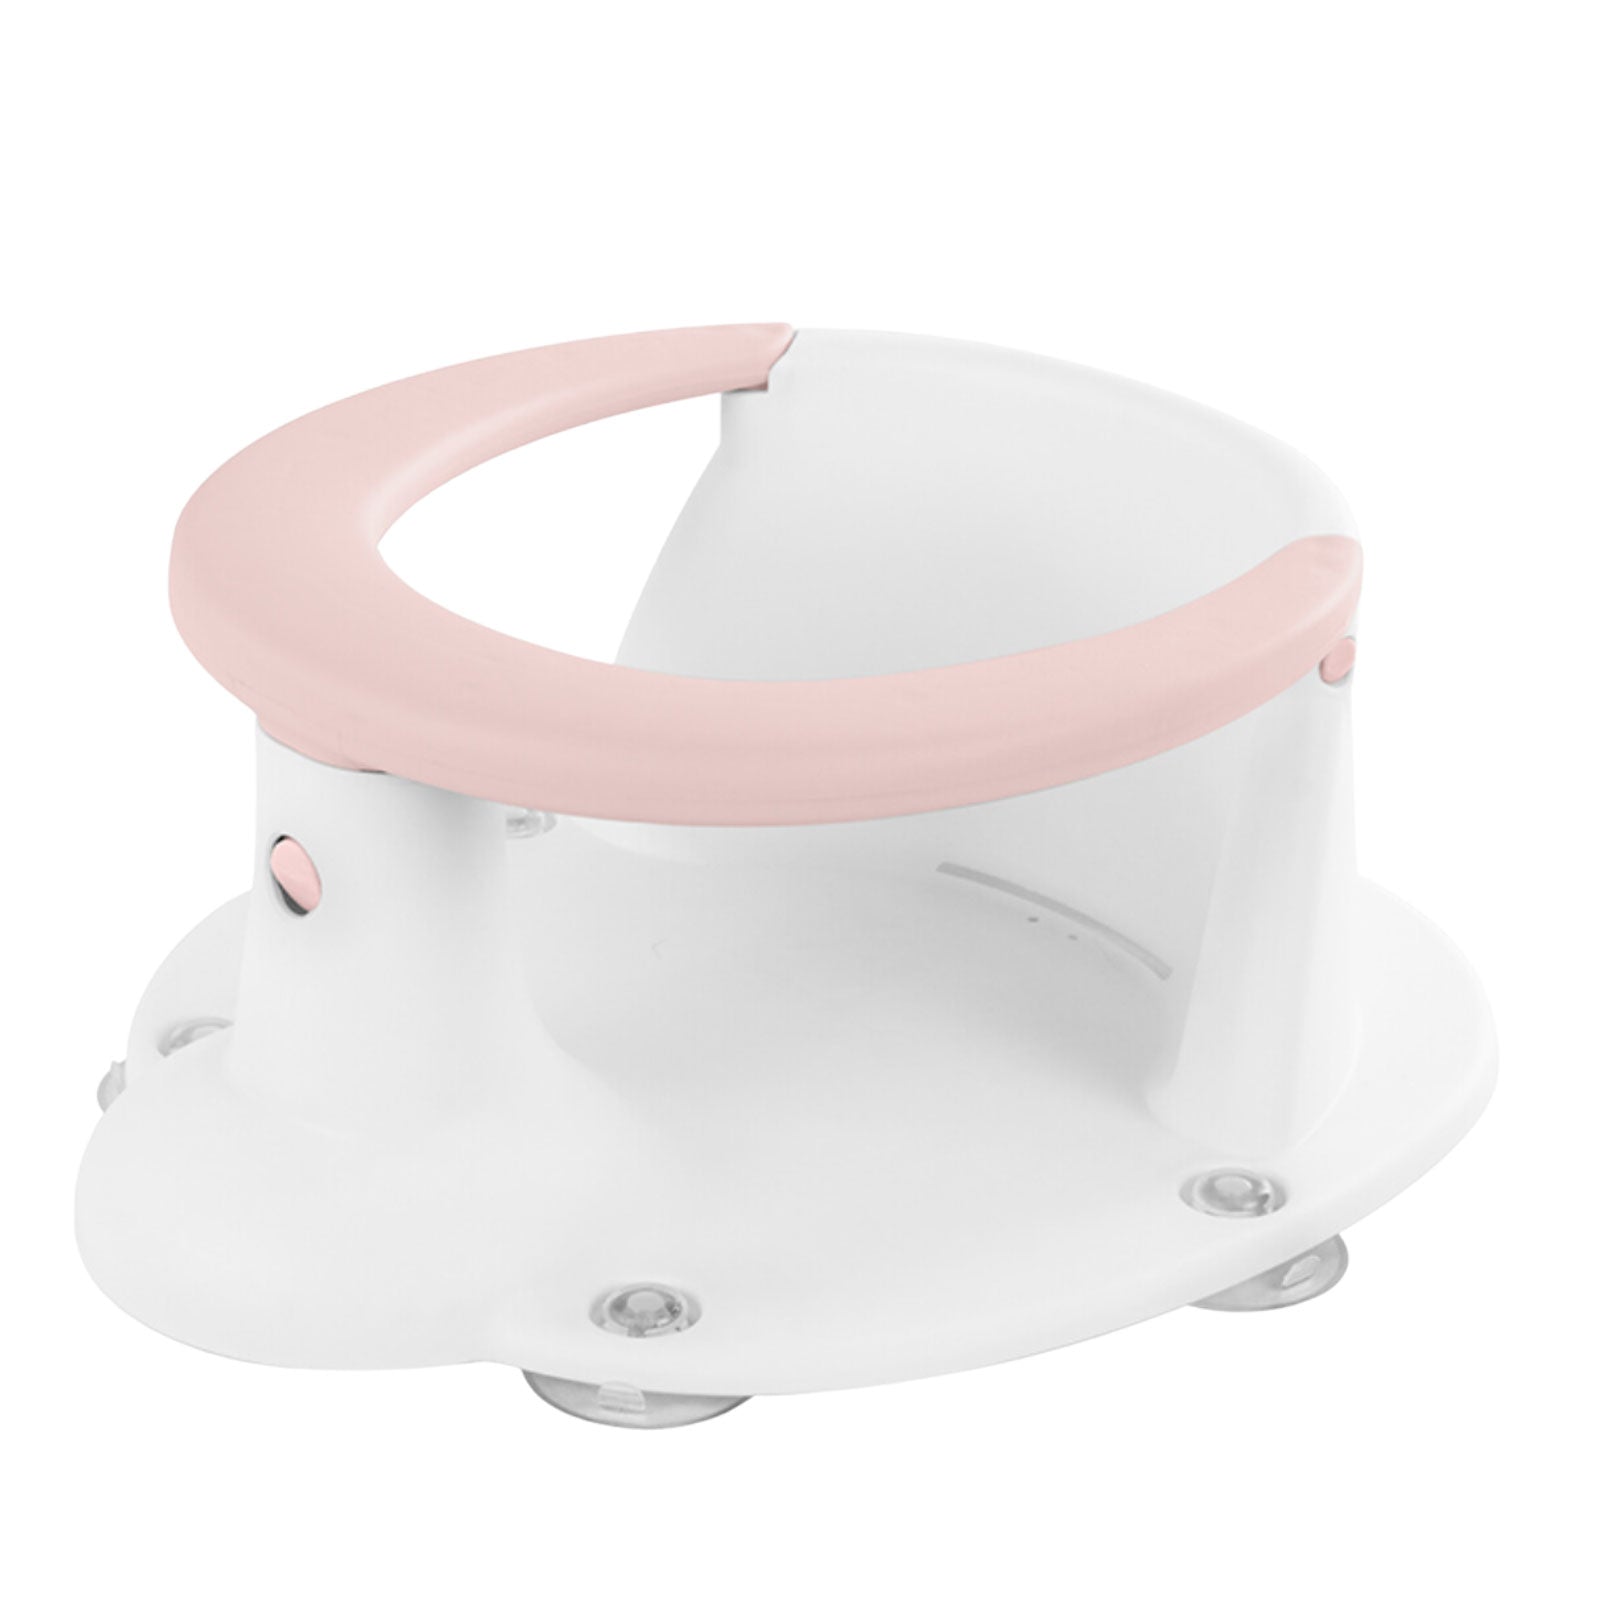 Dolu Baby Bath Seat 7459 with Suction Cup - Bathroom Chair Pink